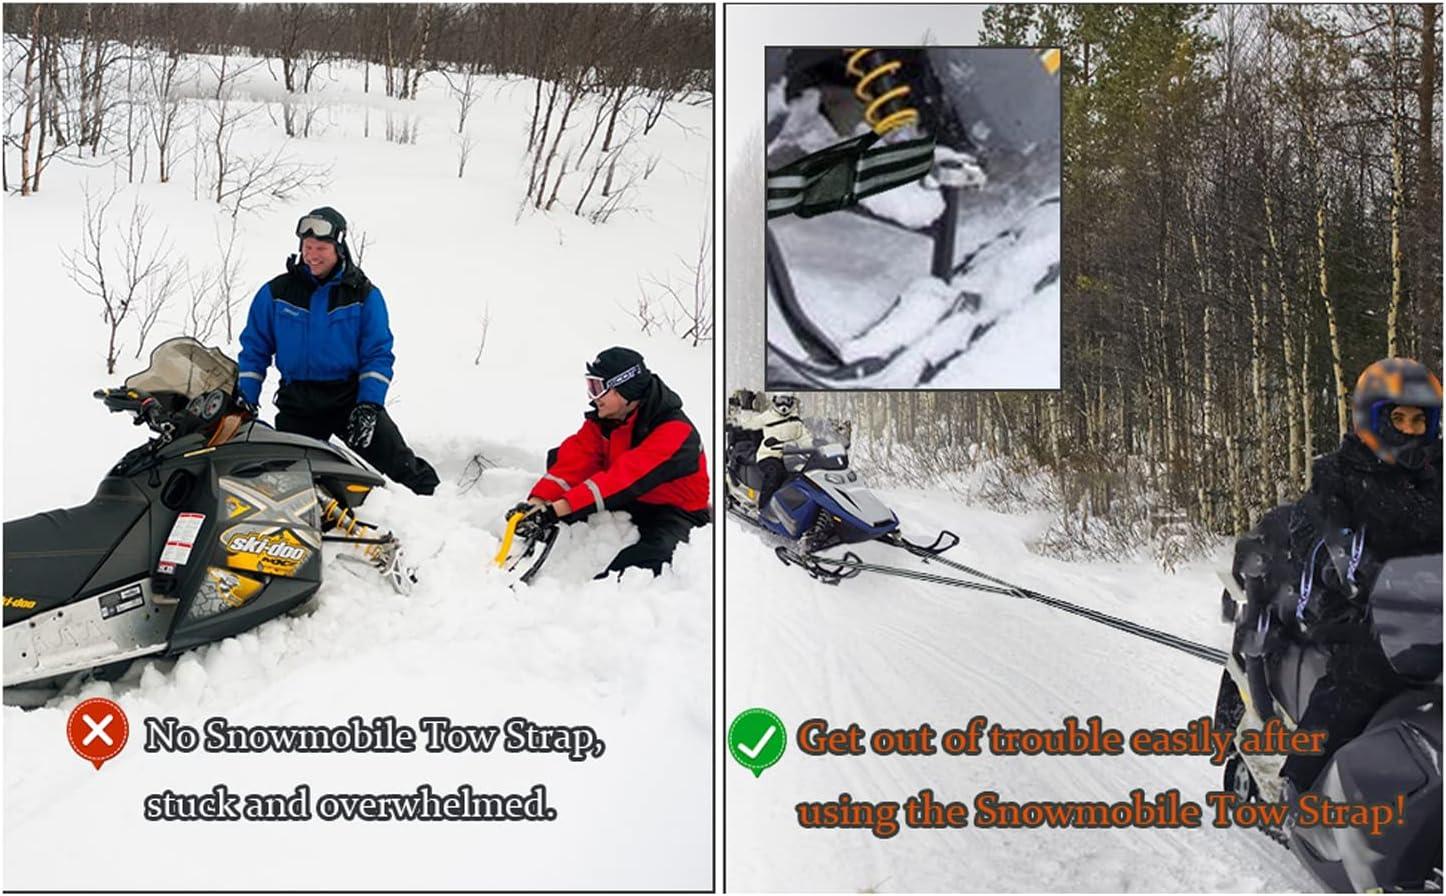 Snowmobile Tow Strap Heavy Duty with Hook, Emergency Snowmobile Tow Rope,  Quick Hook Up and Tow Easilly for Snowmobile, ATV, UTV, Sled, Skidoo,  Snowmobile Accessories Safety Kit